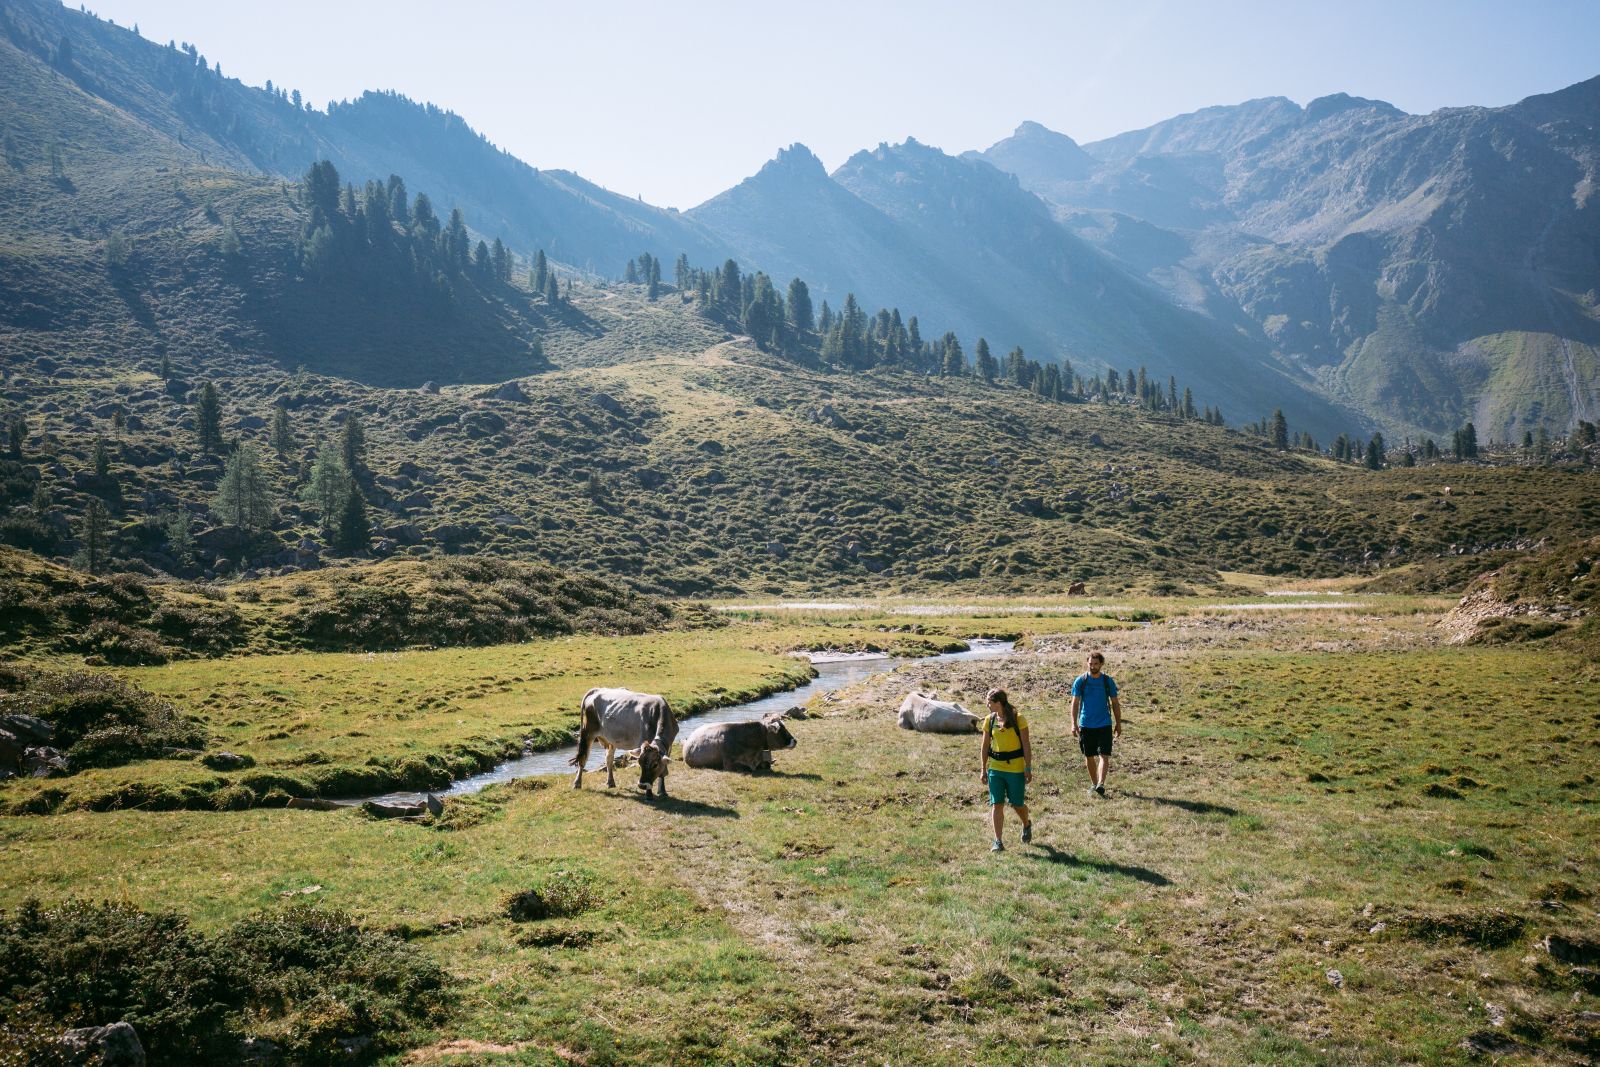 Hikers march past cows next to mountain stream.